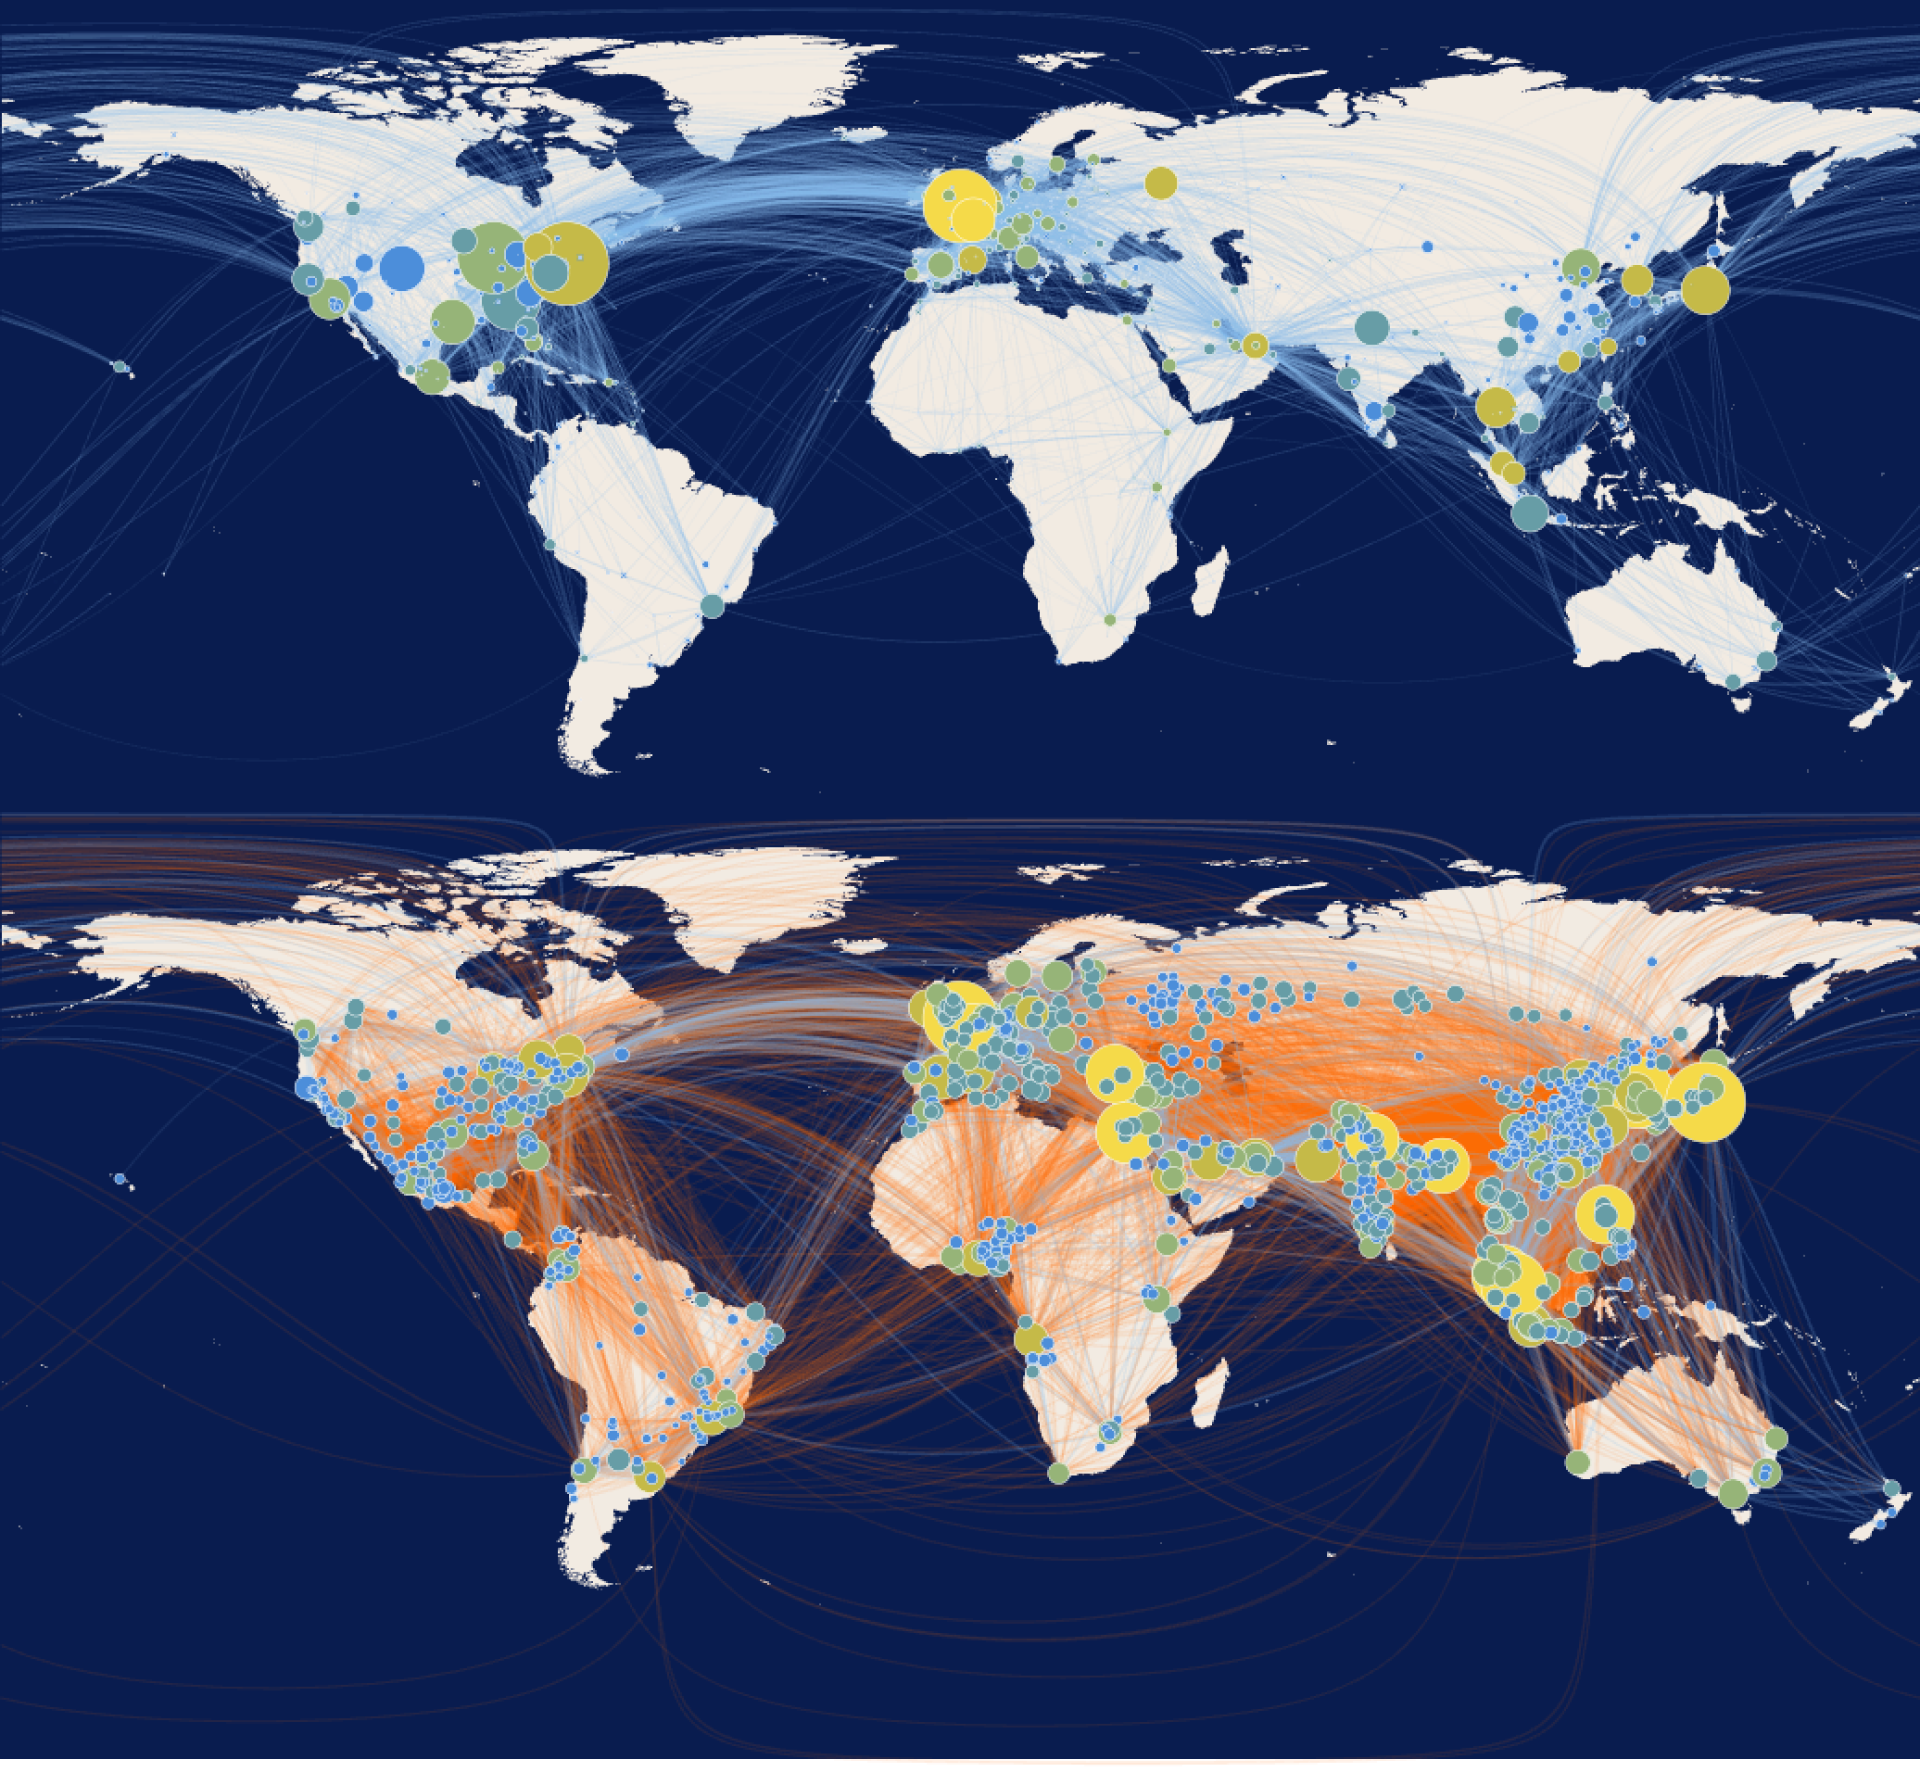 Maps of 2019 and 2050 aviation networks. New connections are shown in 2050 map.